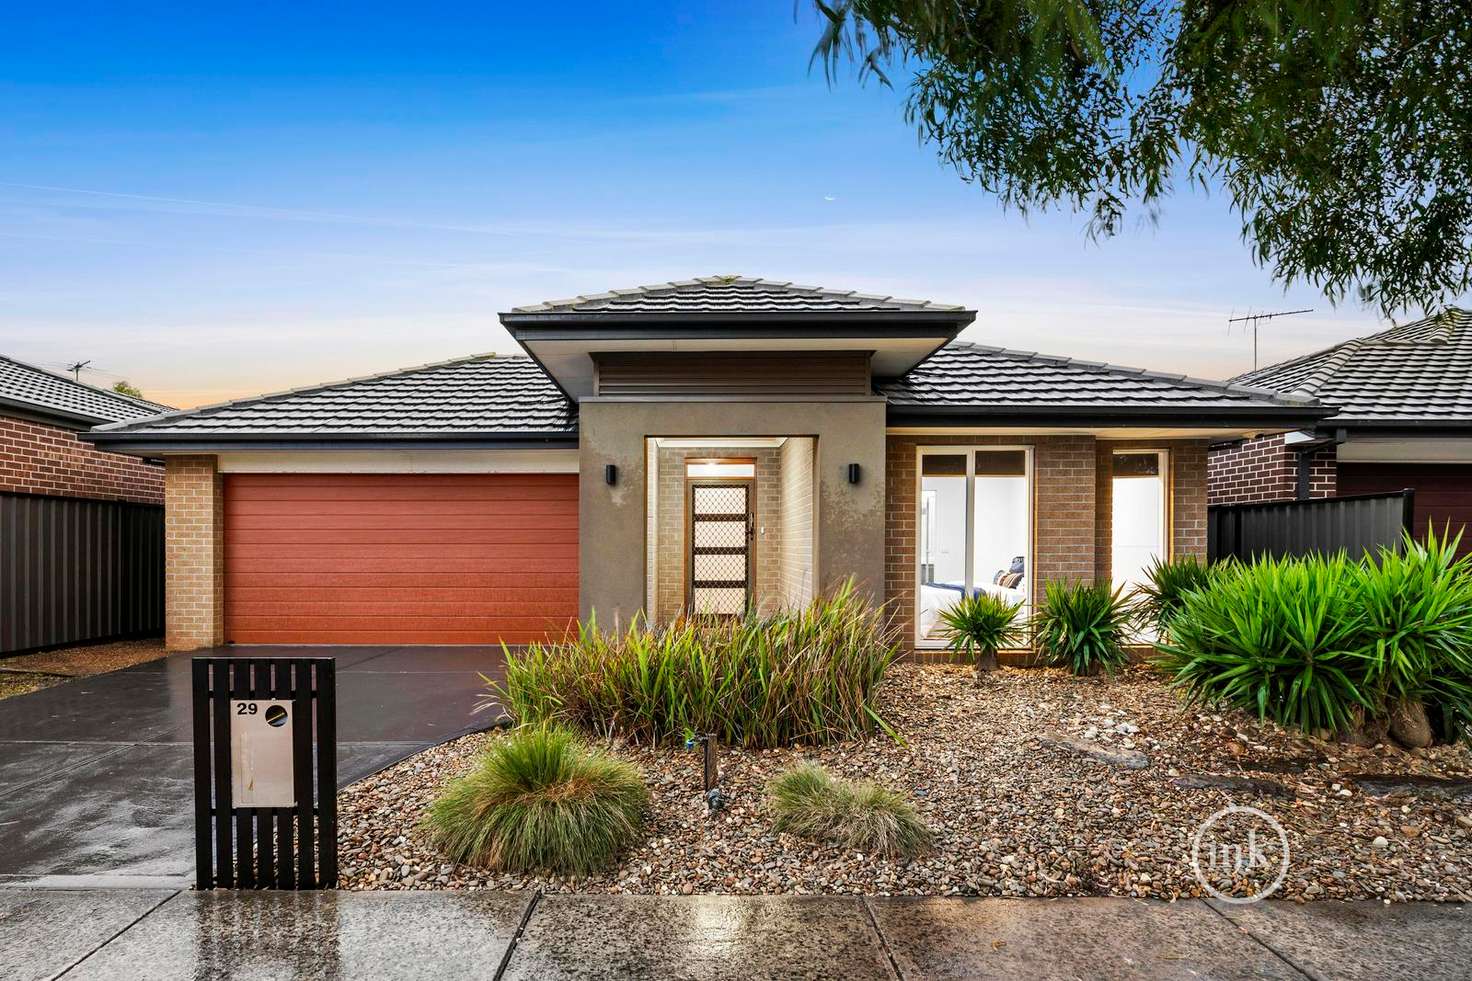 Main view of Homely house listing, 29 Craigmoor Crescent, Mernda VIC 3754